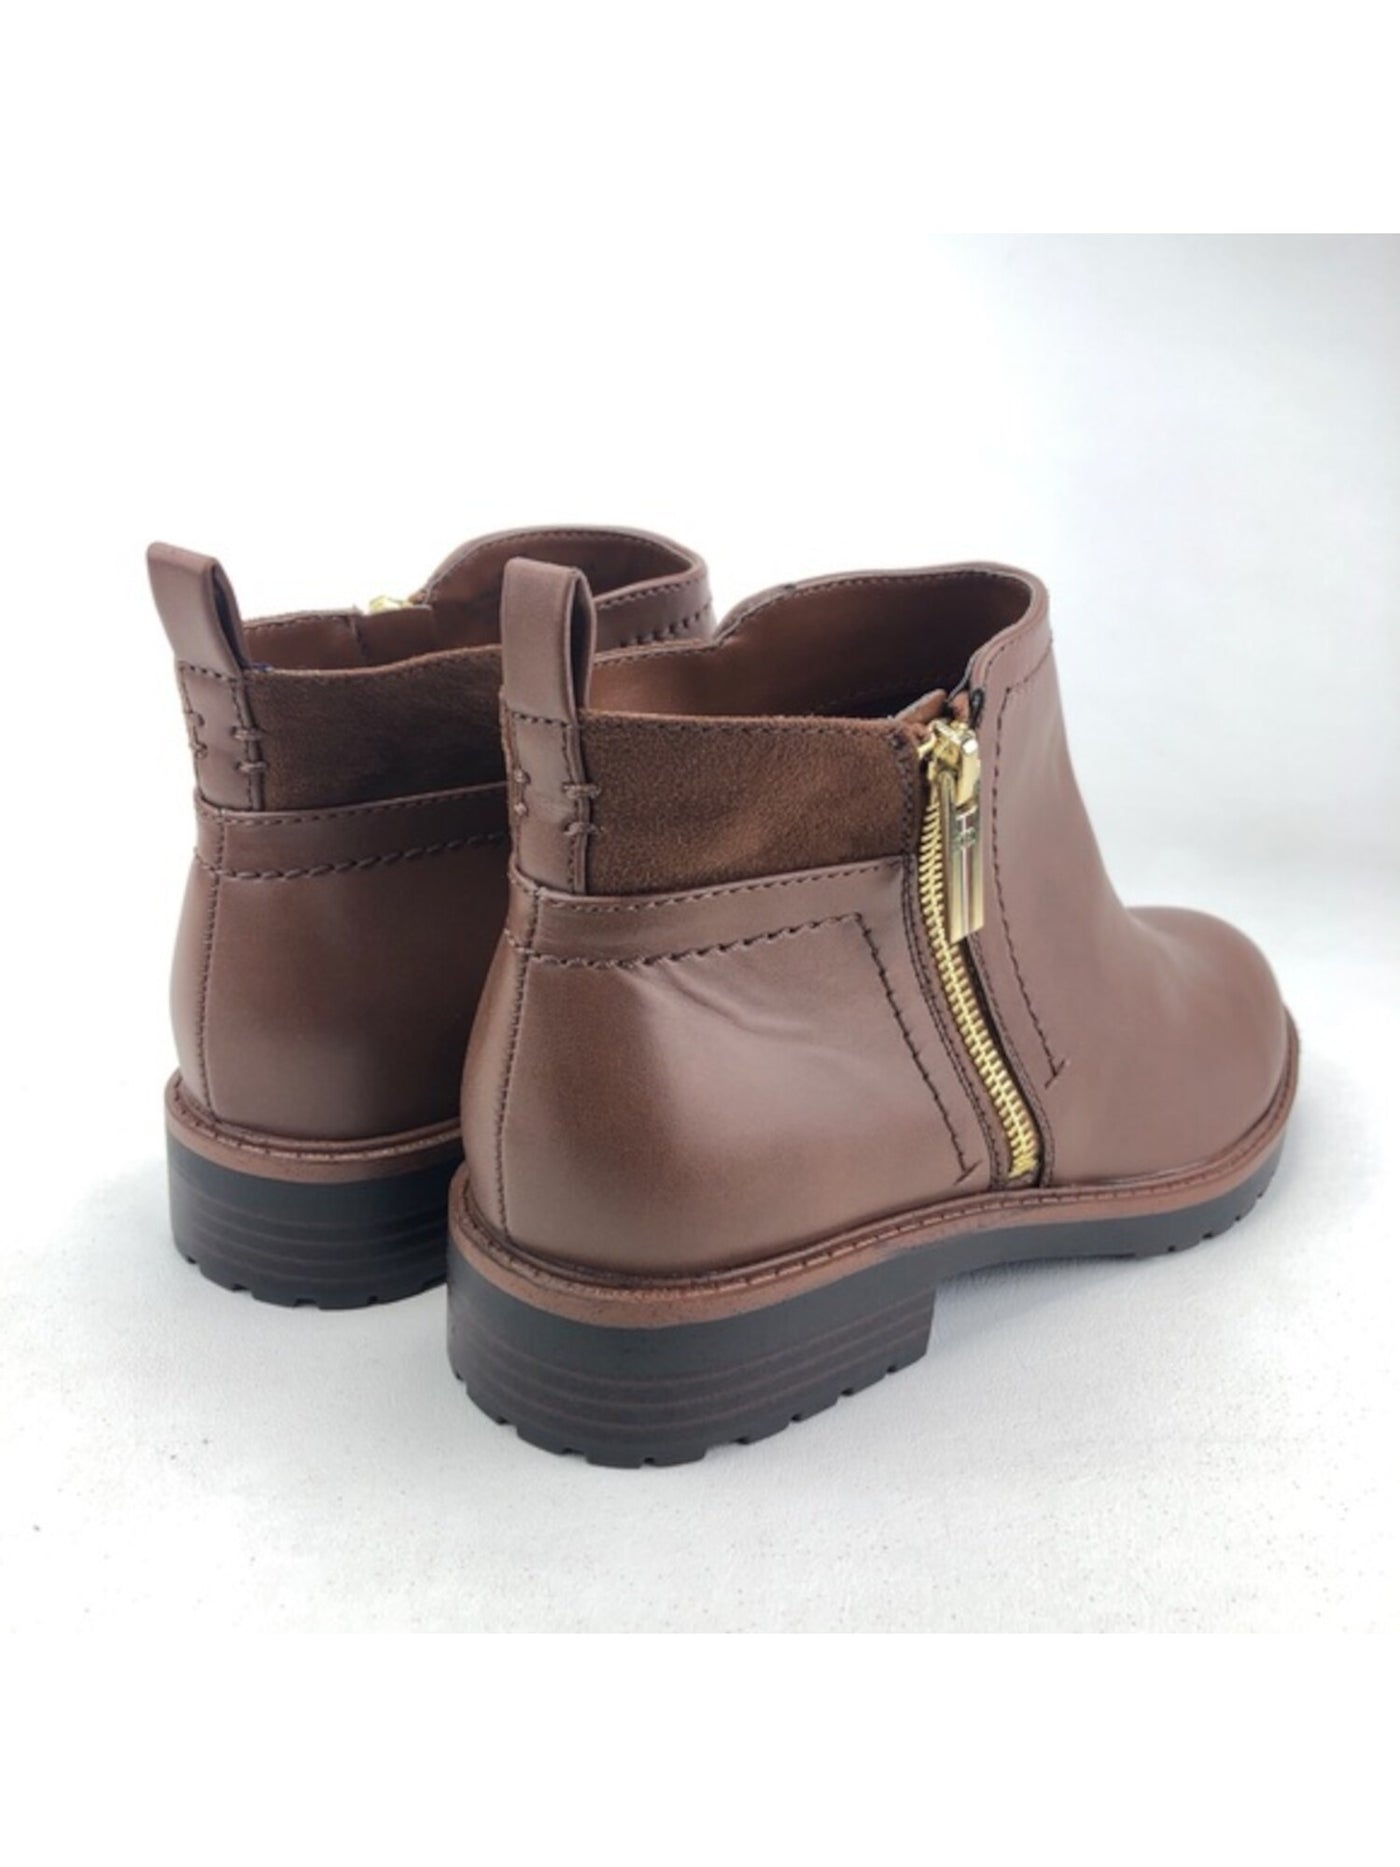 TOMMY HILFIGER Womens Brown Pull On Tab Comfort Lug Sole Fawn Round Toe Block Heel Zip-Up Booties 9.5 M